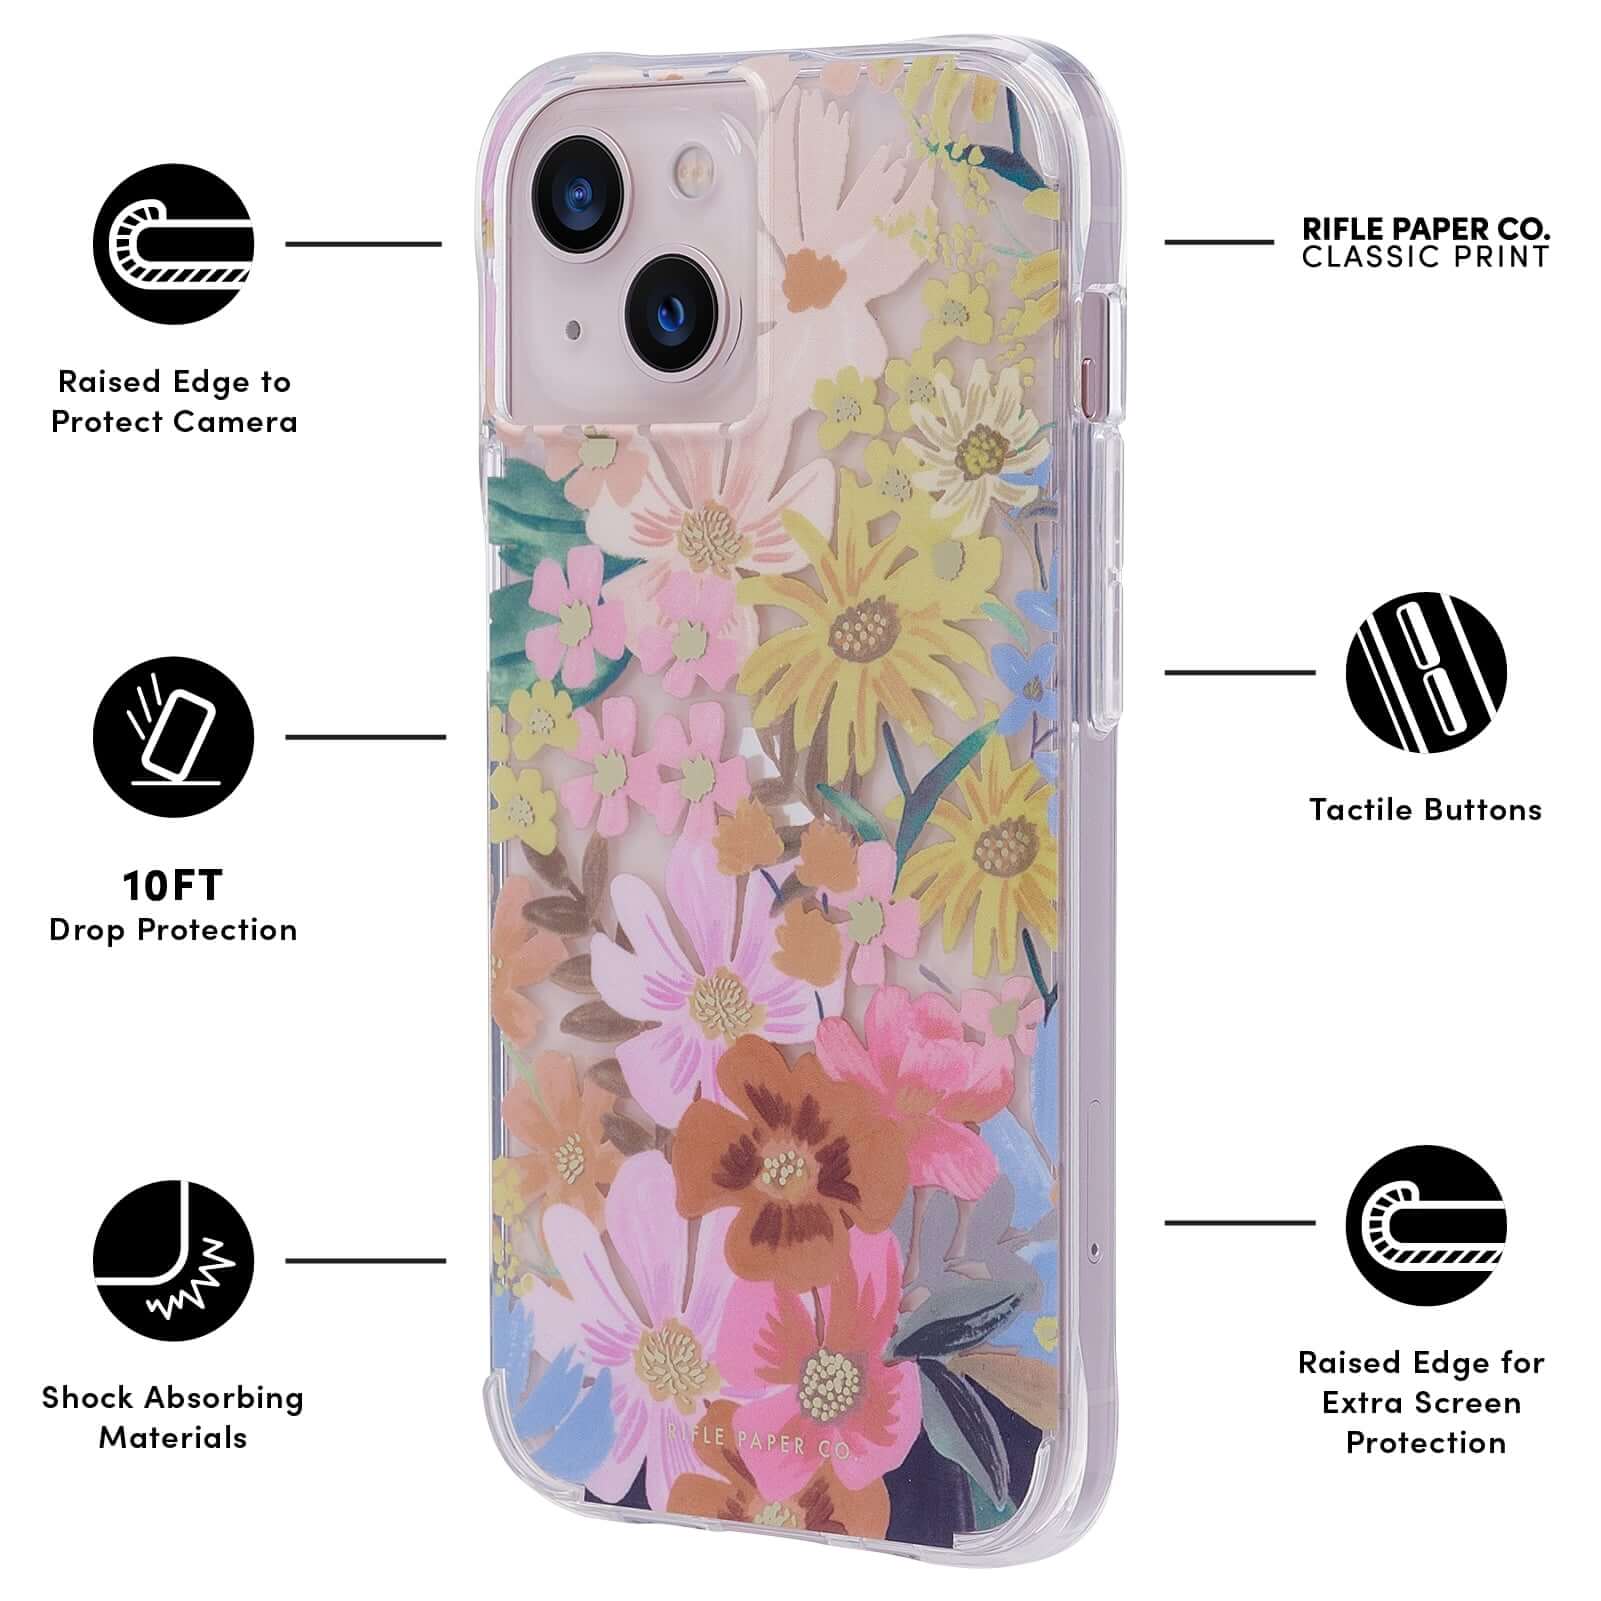 FEATURES: RAISED EDGE TO PROTECT CAMERA, 10 FT DROP PROTECTION, SHOCK ABSORBING MATERIALS, RIFLE PAPER CO. CLASSIC PRINT, TACTILE BUTTONS, RAISED EDGE FOR EXTRA SCREEN PROTECTION. COLOR::MARGUERITE